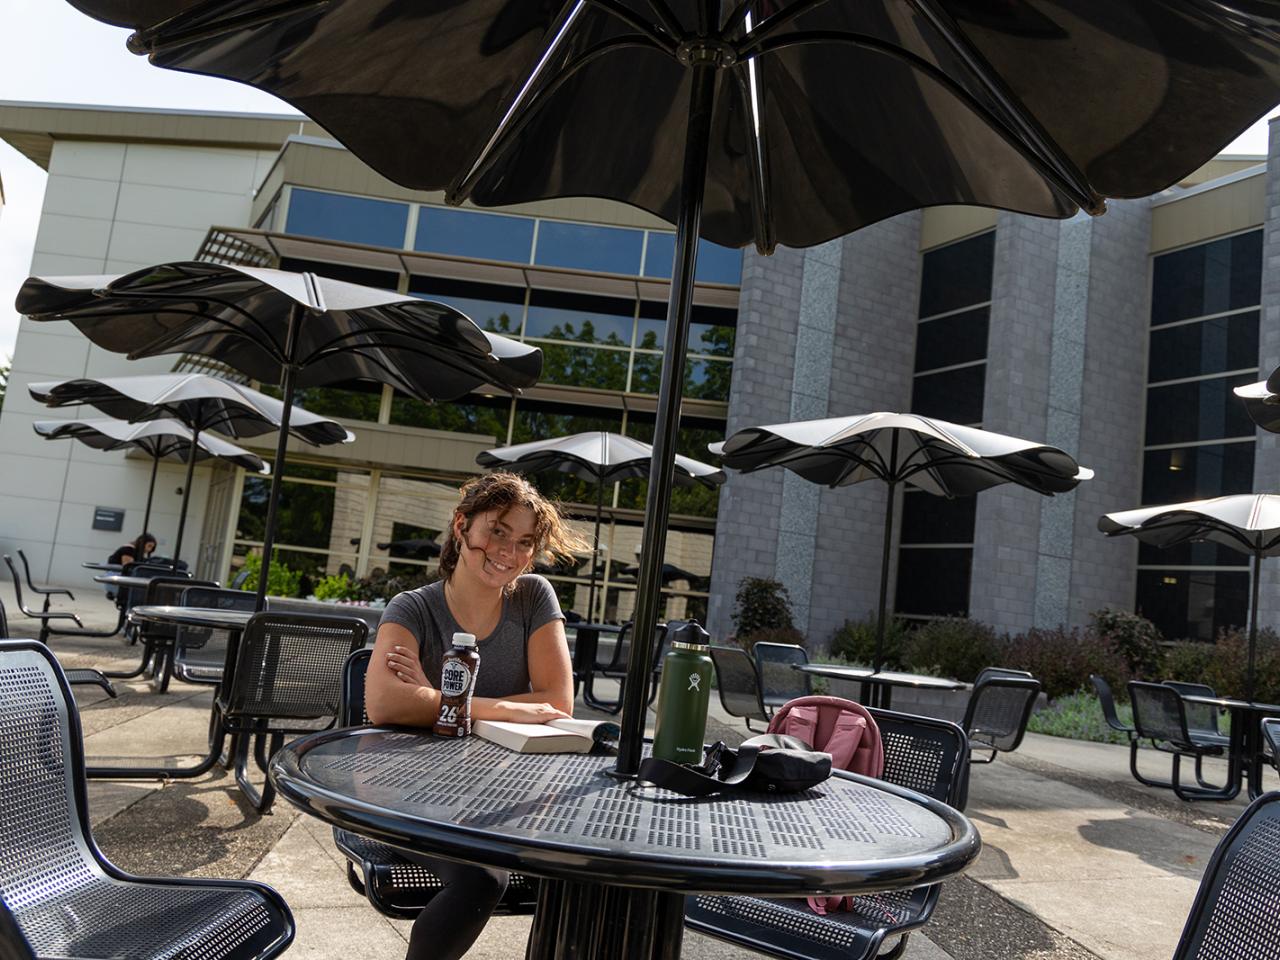 A students looks up from a book that she is reading at a table outside of the Reese Center.